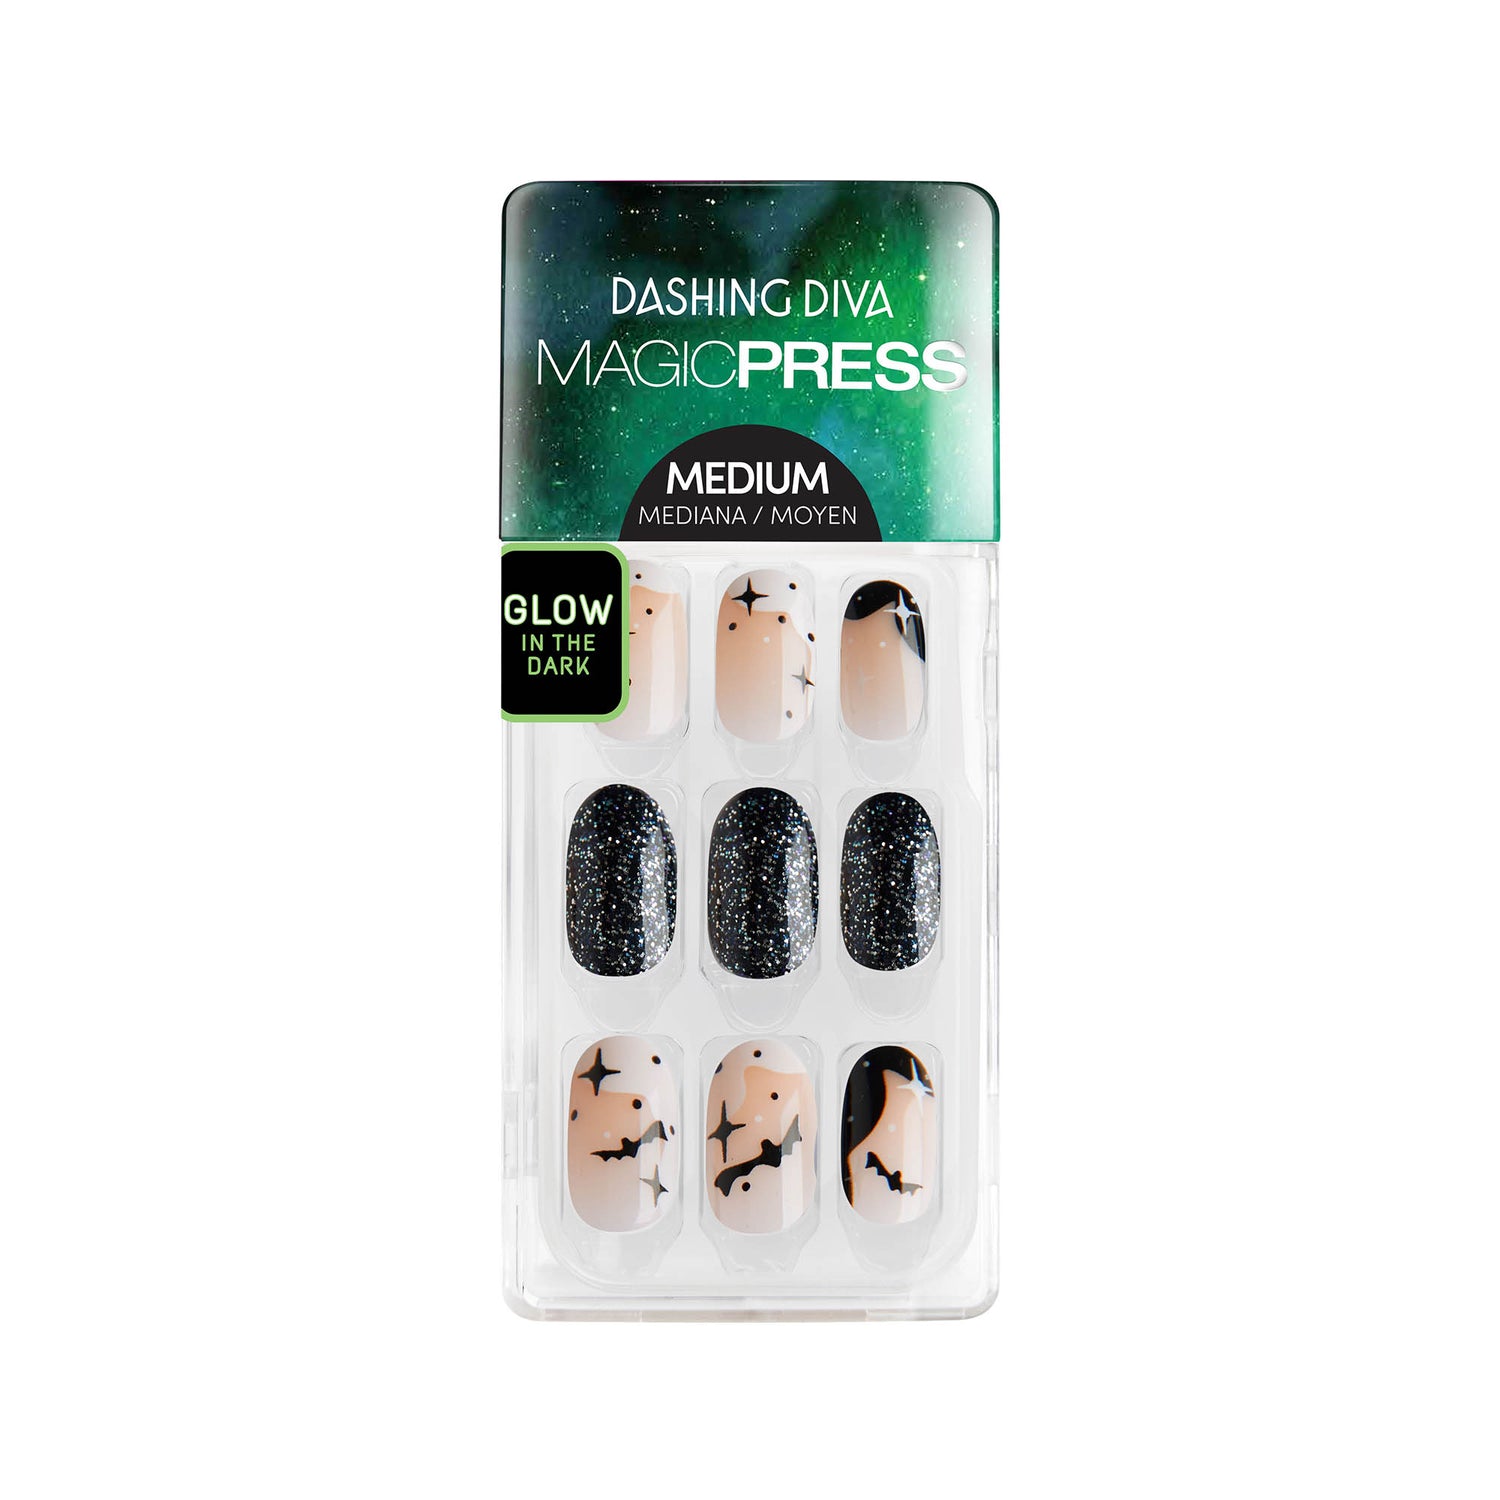 Dashing Diva MAGIC PRESS medium, oval neutral press on gel nails with abstract wavy black & white french tips, black glitter, bat, & celestial accents.